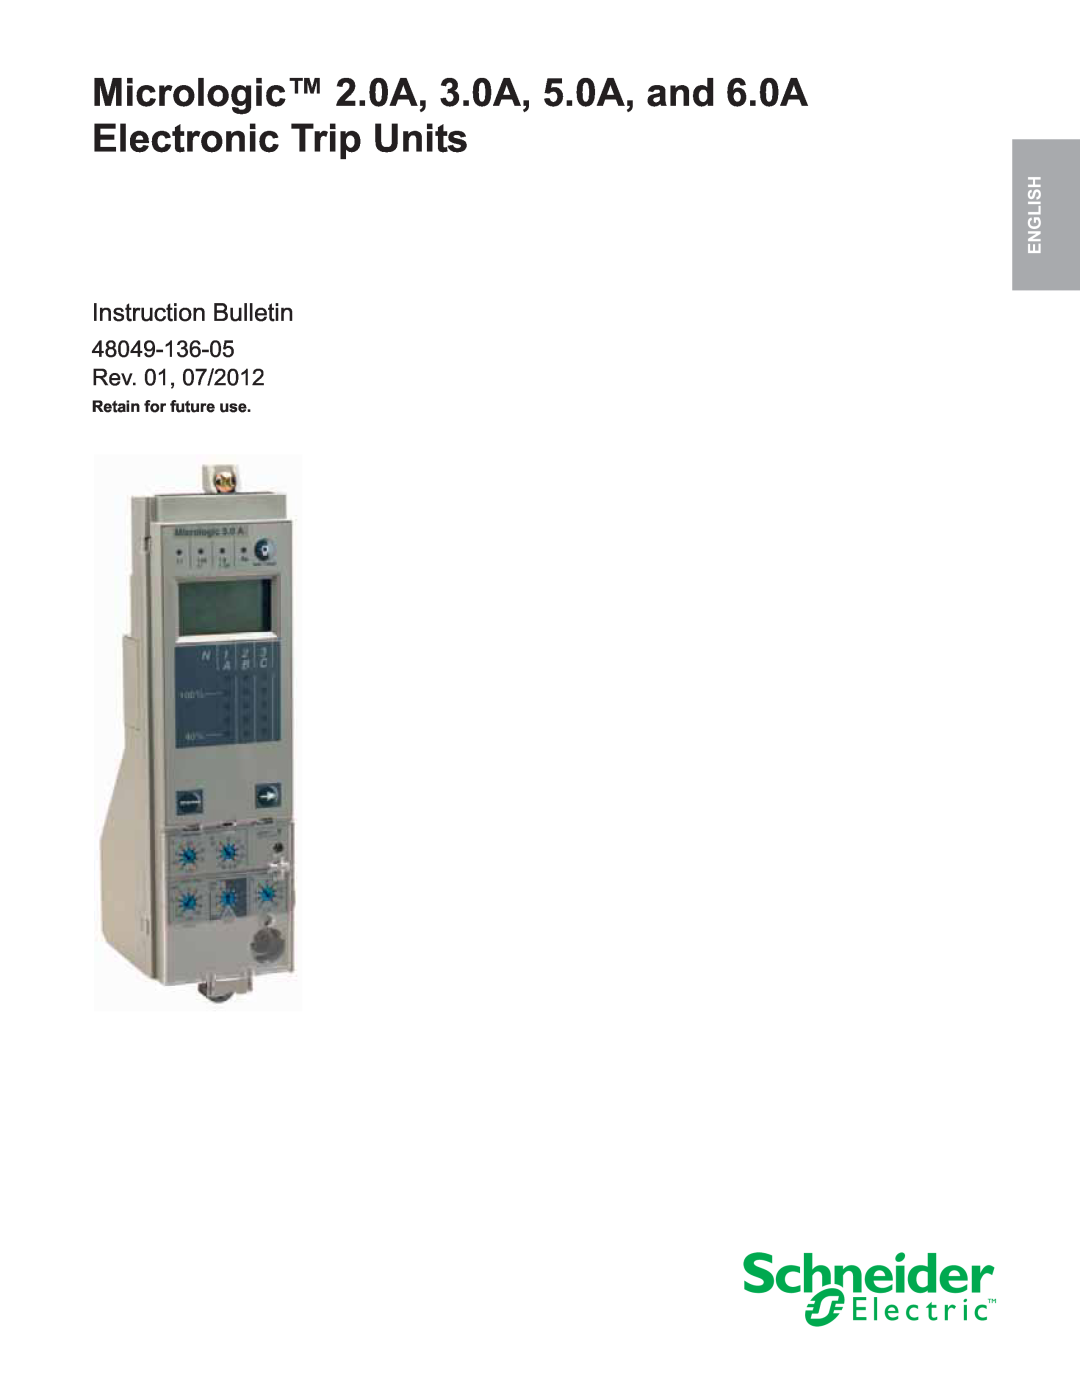 Schneider Electric manual English, Retain for future use, Micrologic 2.0A, 3.0A, 5.0A, and 6.0A Electronic Trip Units 